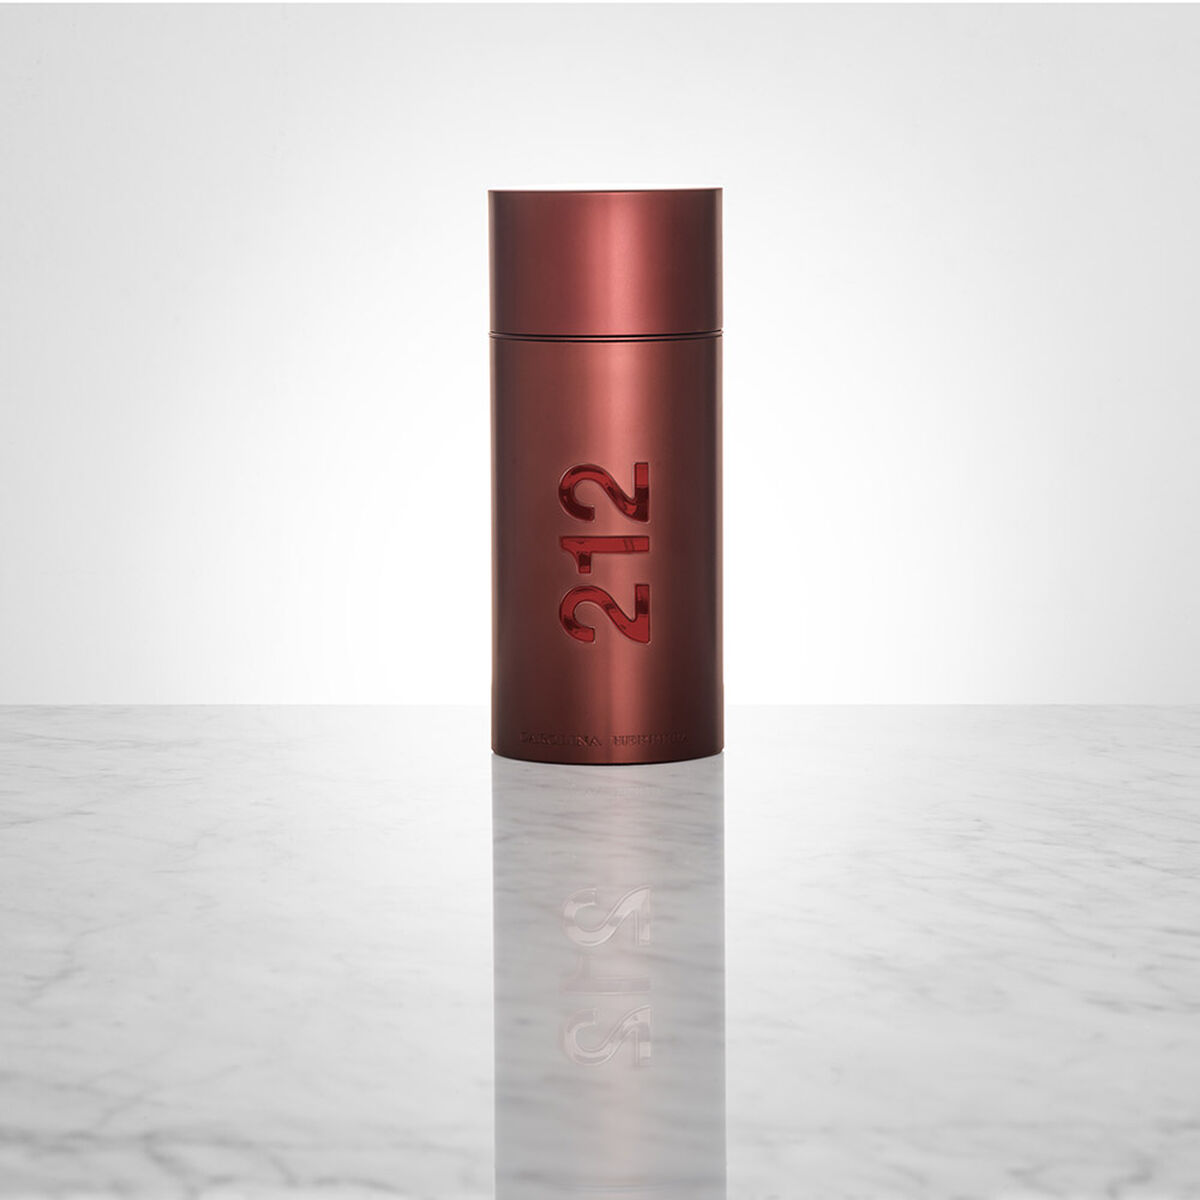 212 Sexy Men EDT 100 ml + After Shave 100 ml